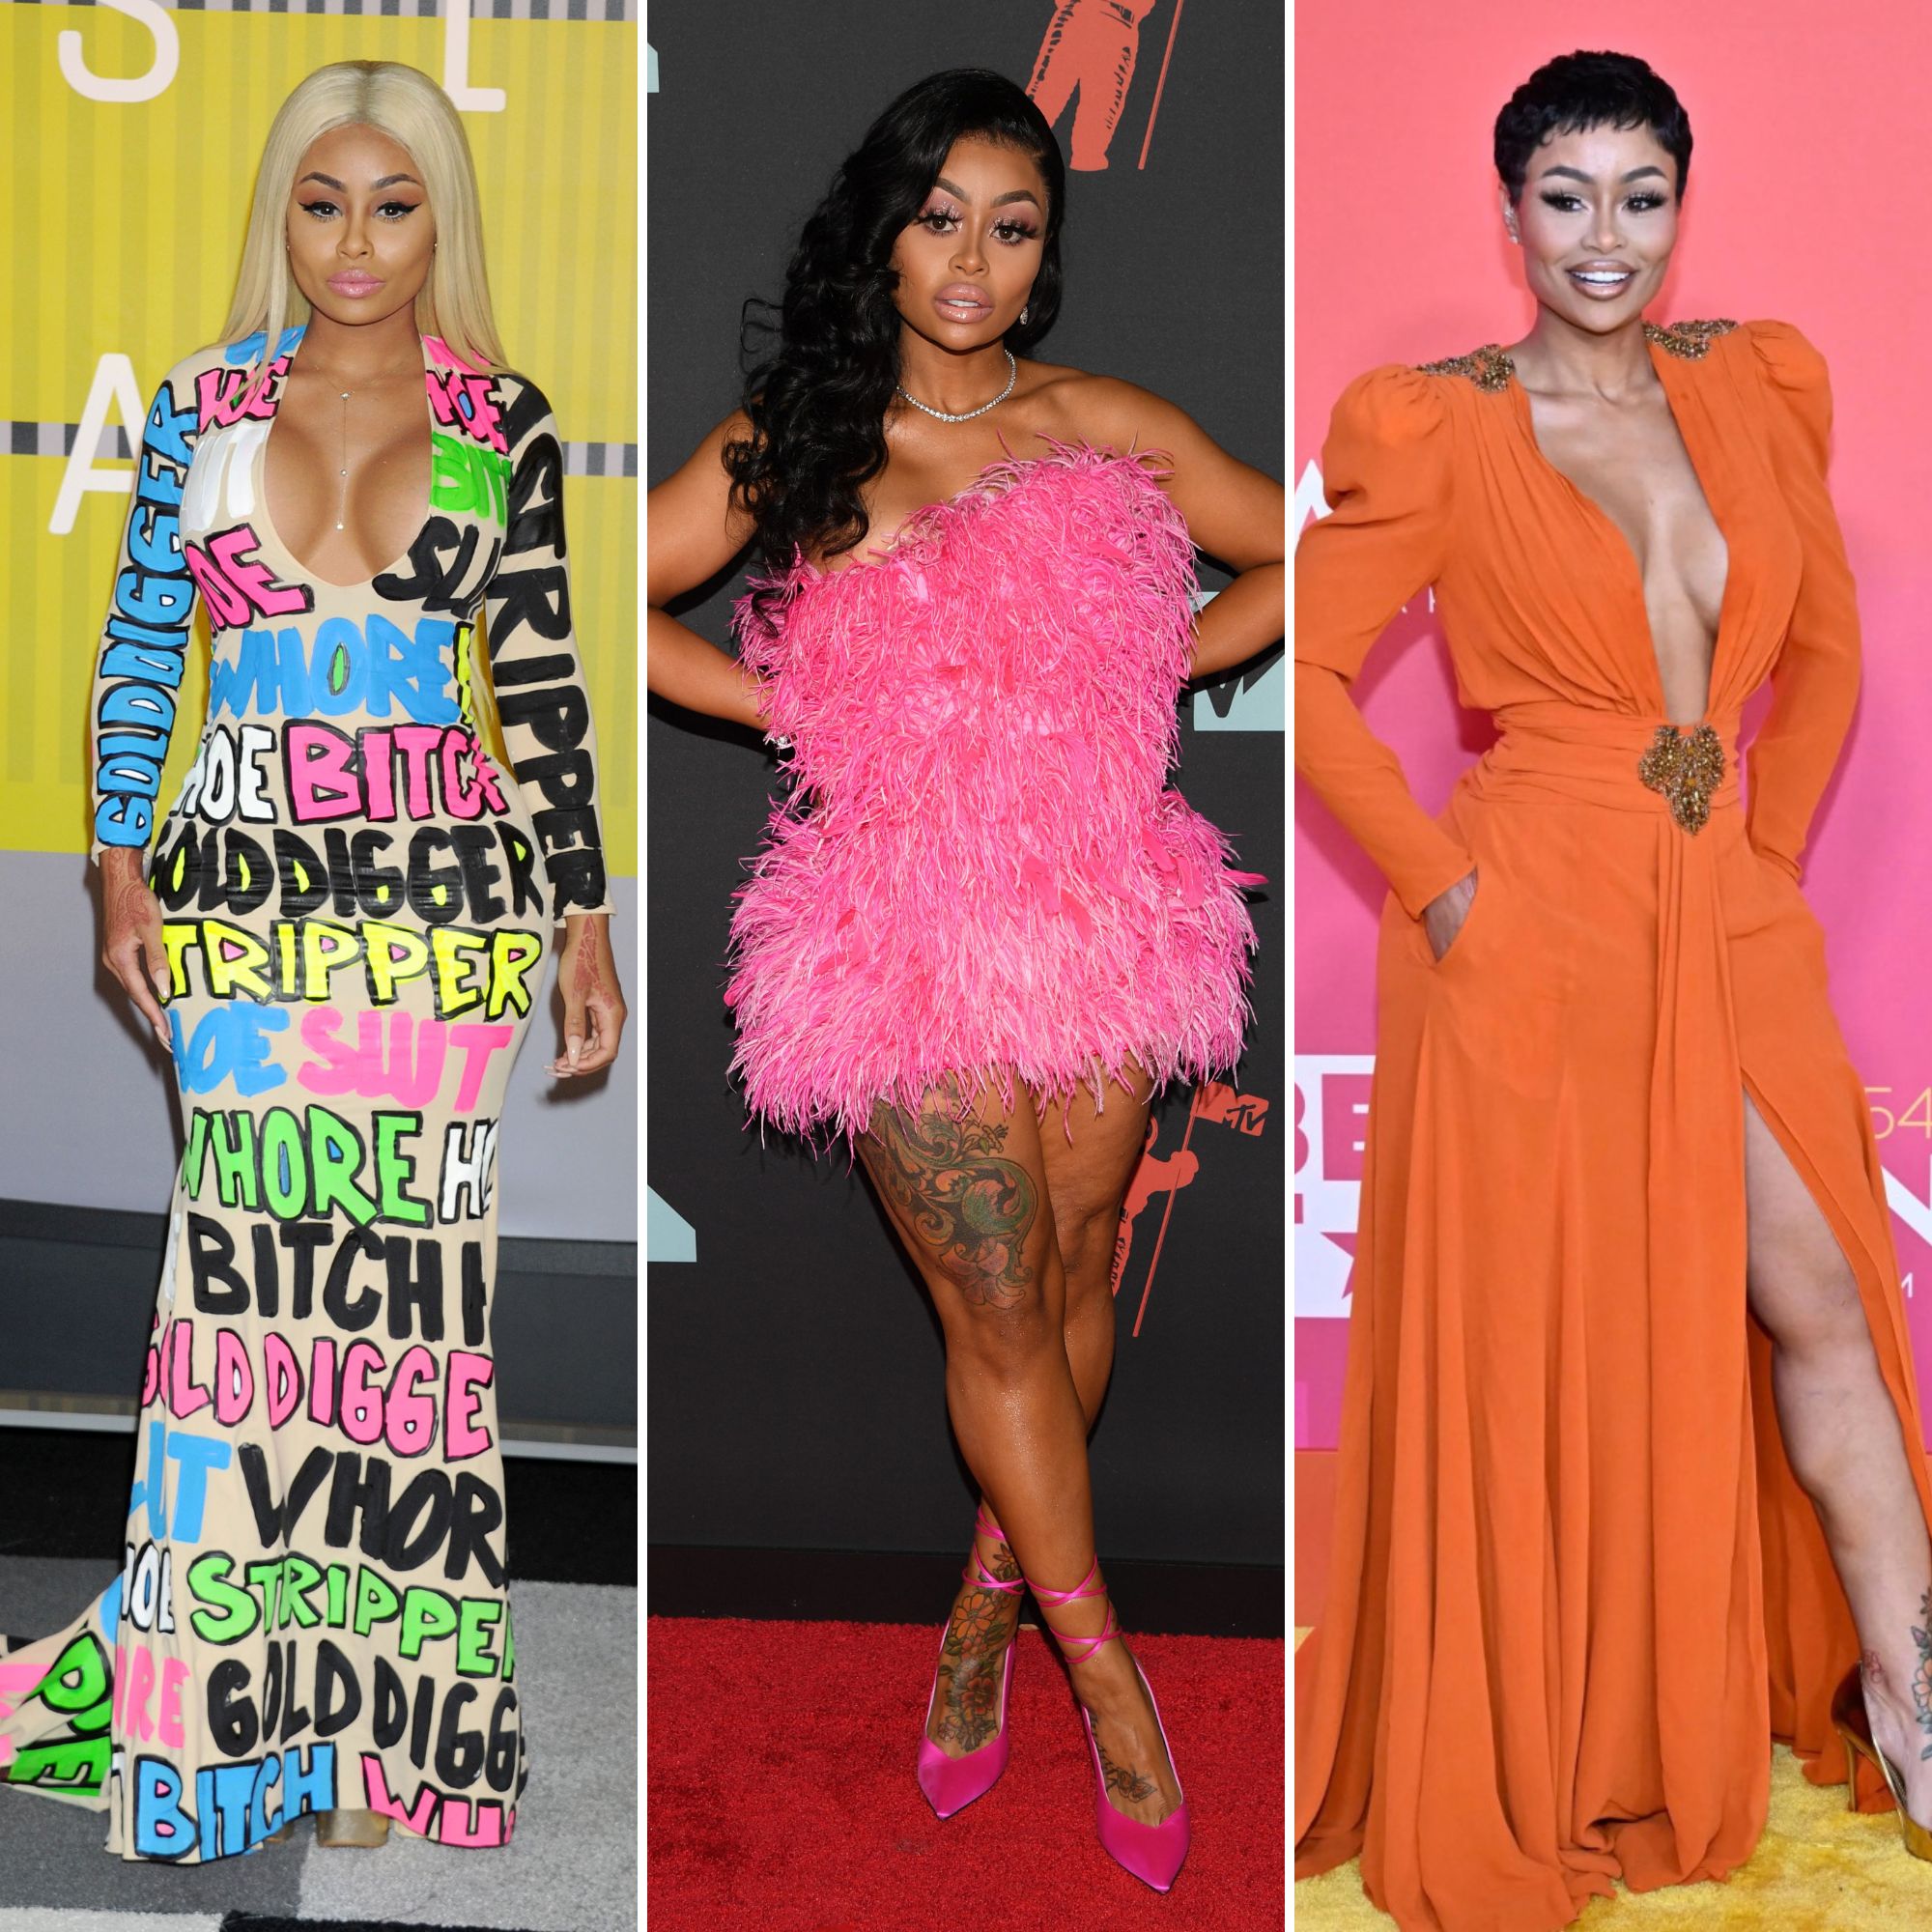 Has Blac Chyna Gotten Plastic Surgery? Then and Now Photos